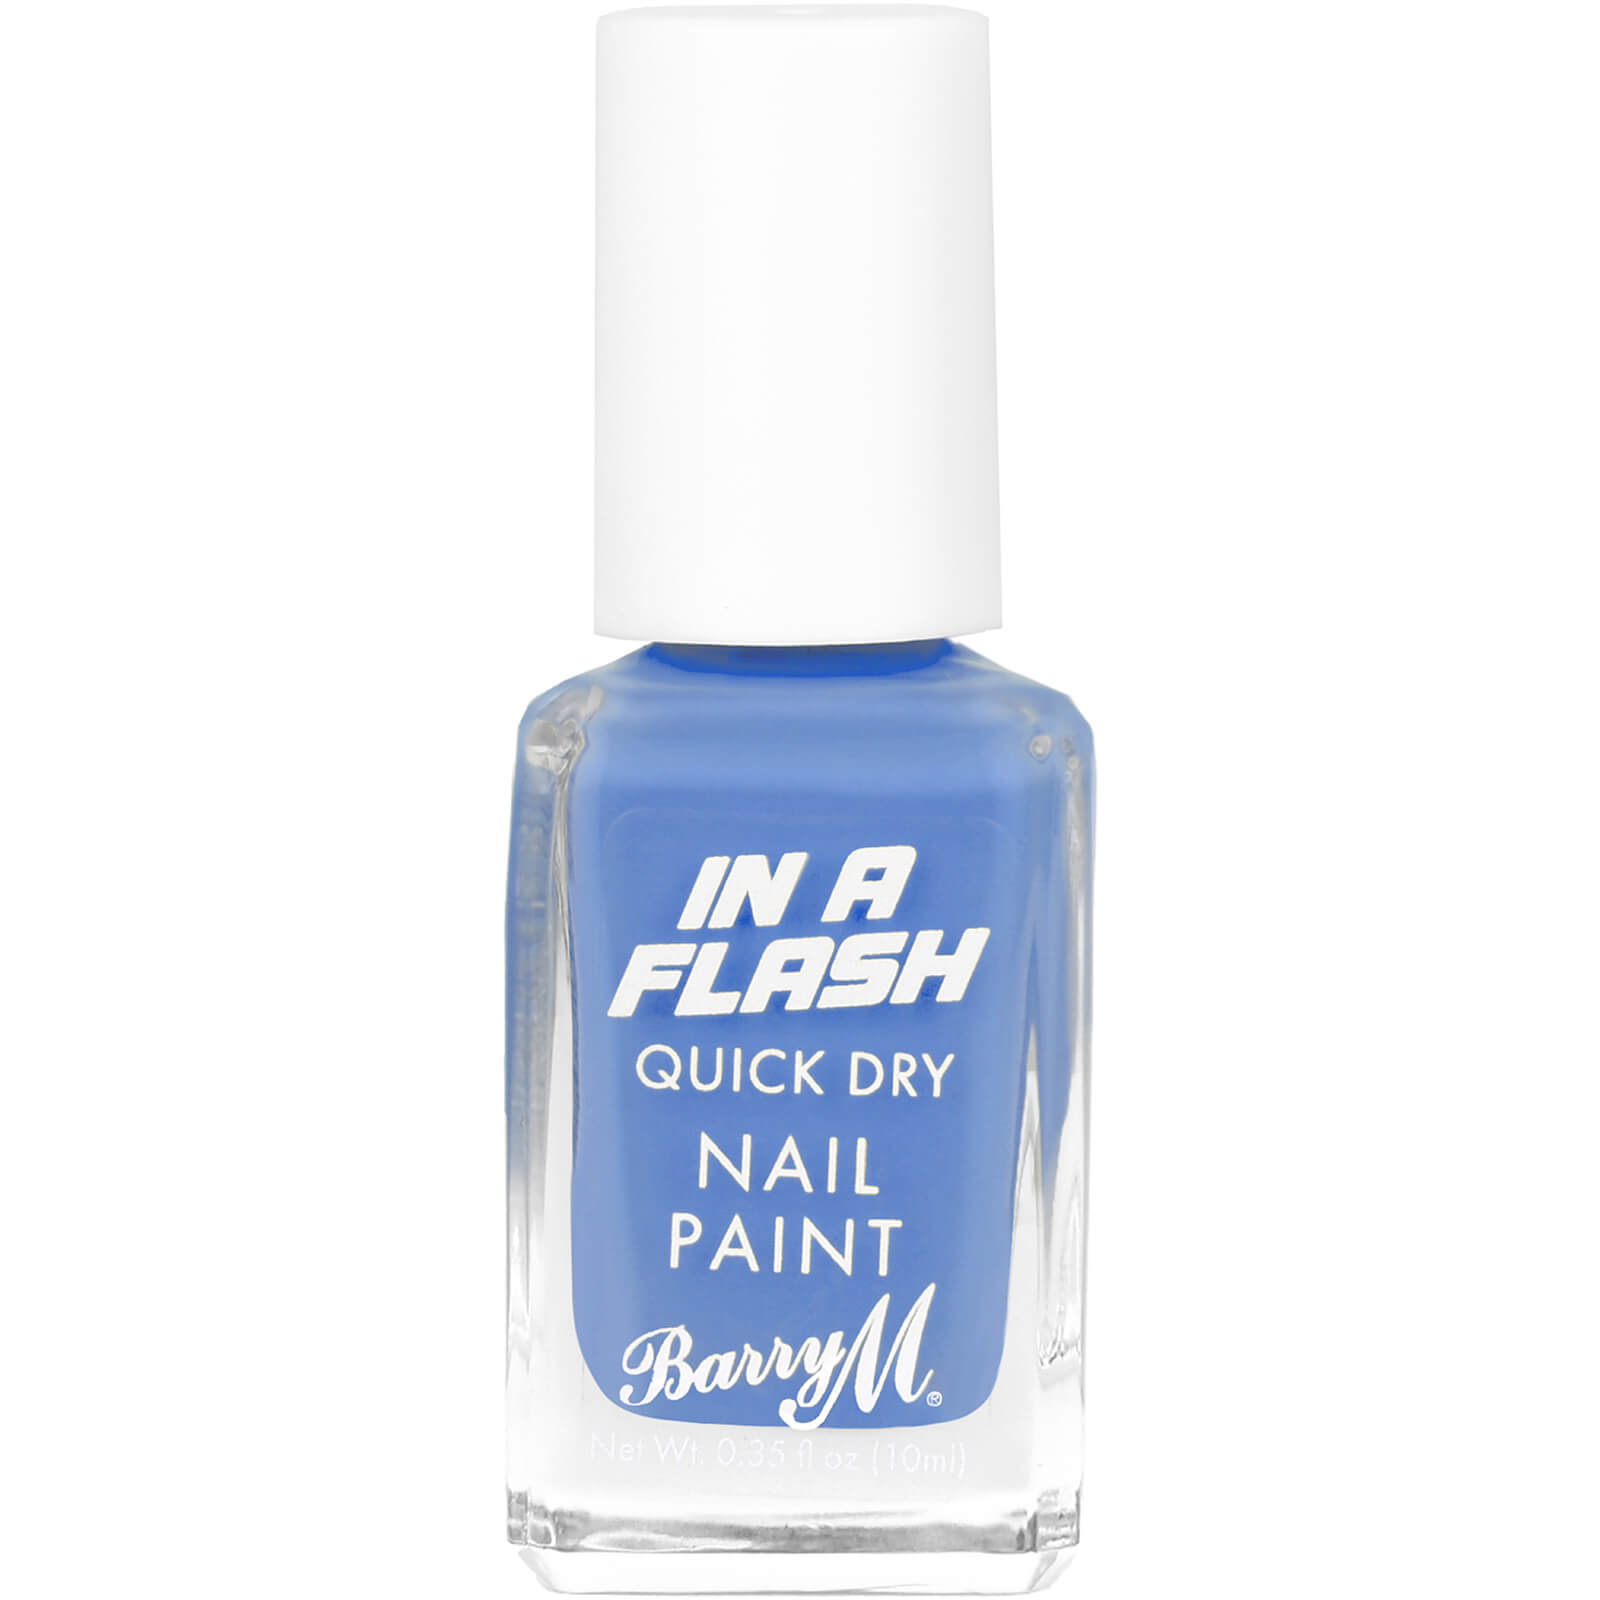 Barry M Cosmetics in a Flash Quick Dry Nail Paint 10ml (Various Shades) - Turquoise Thrill